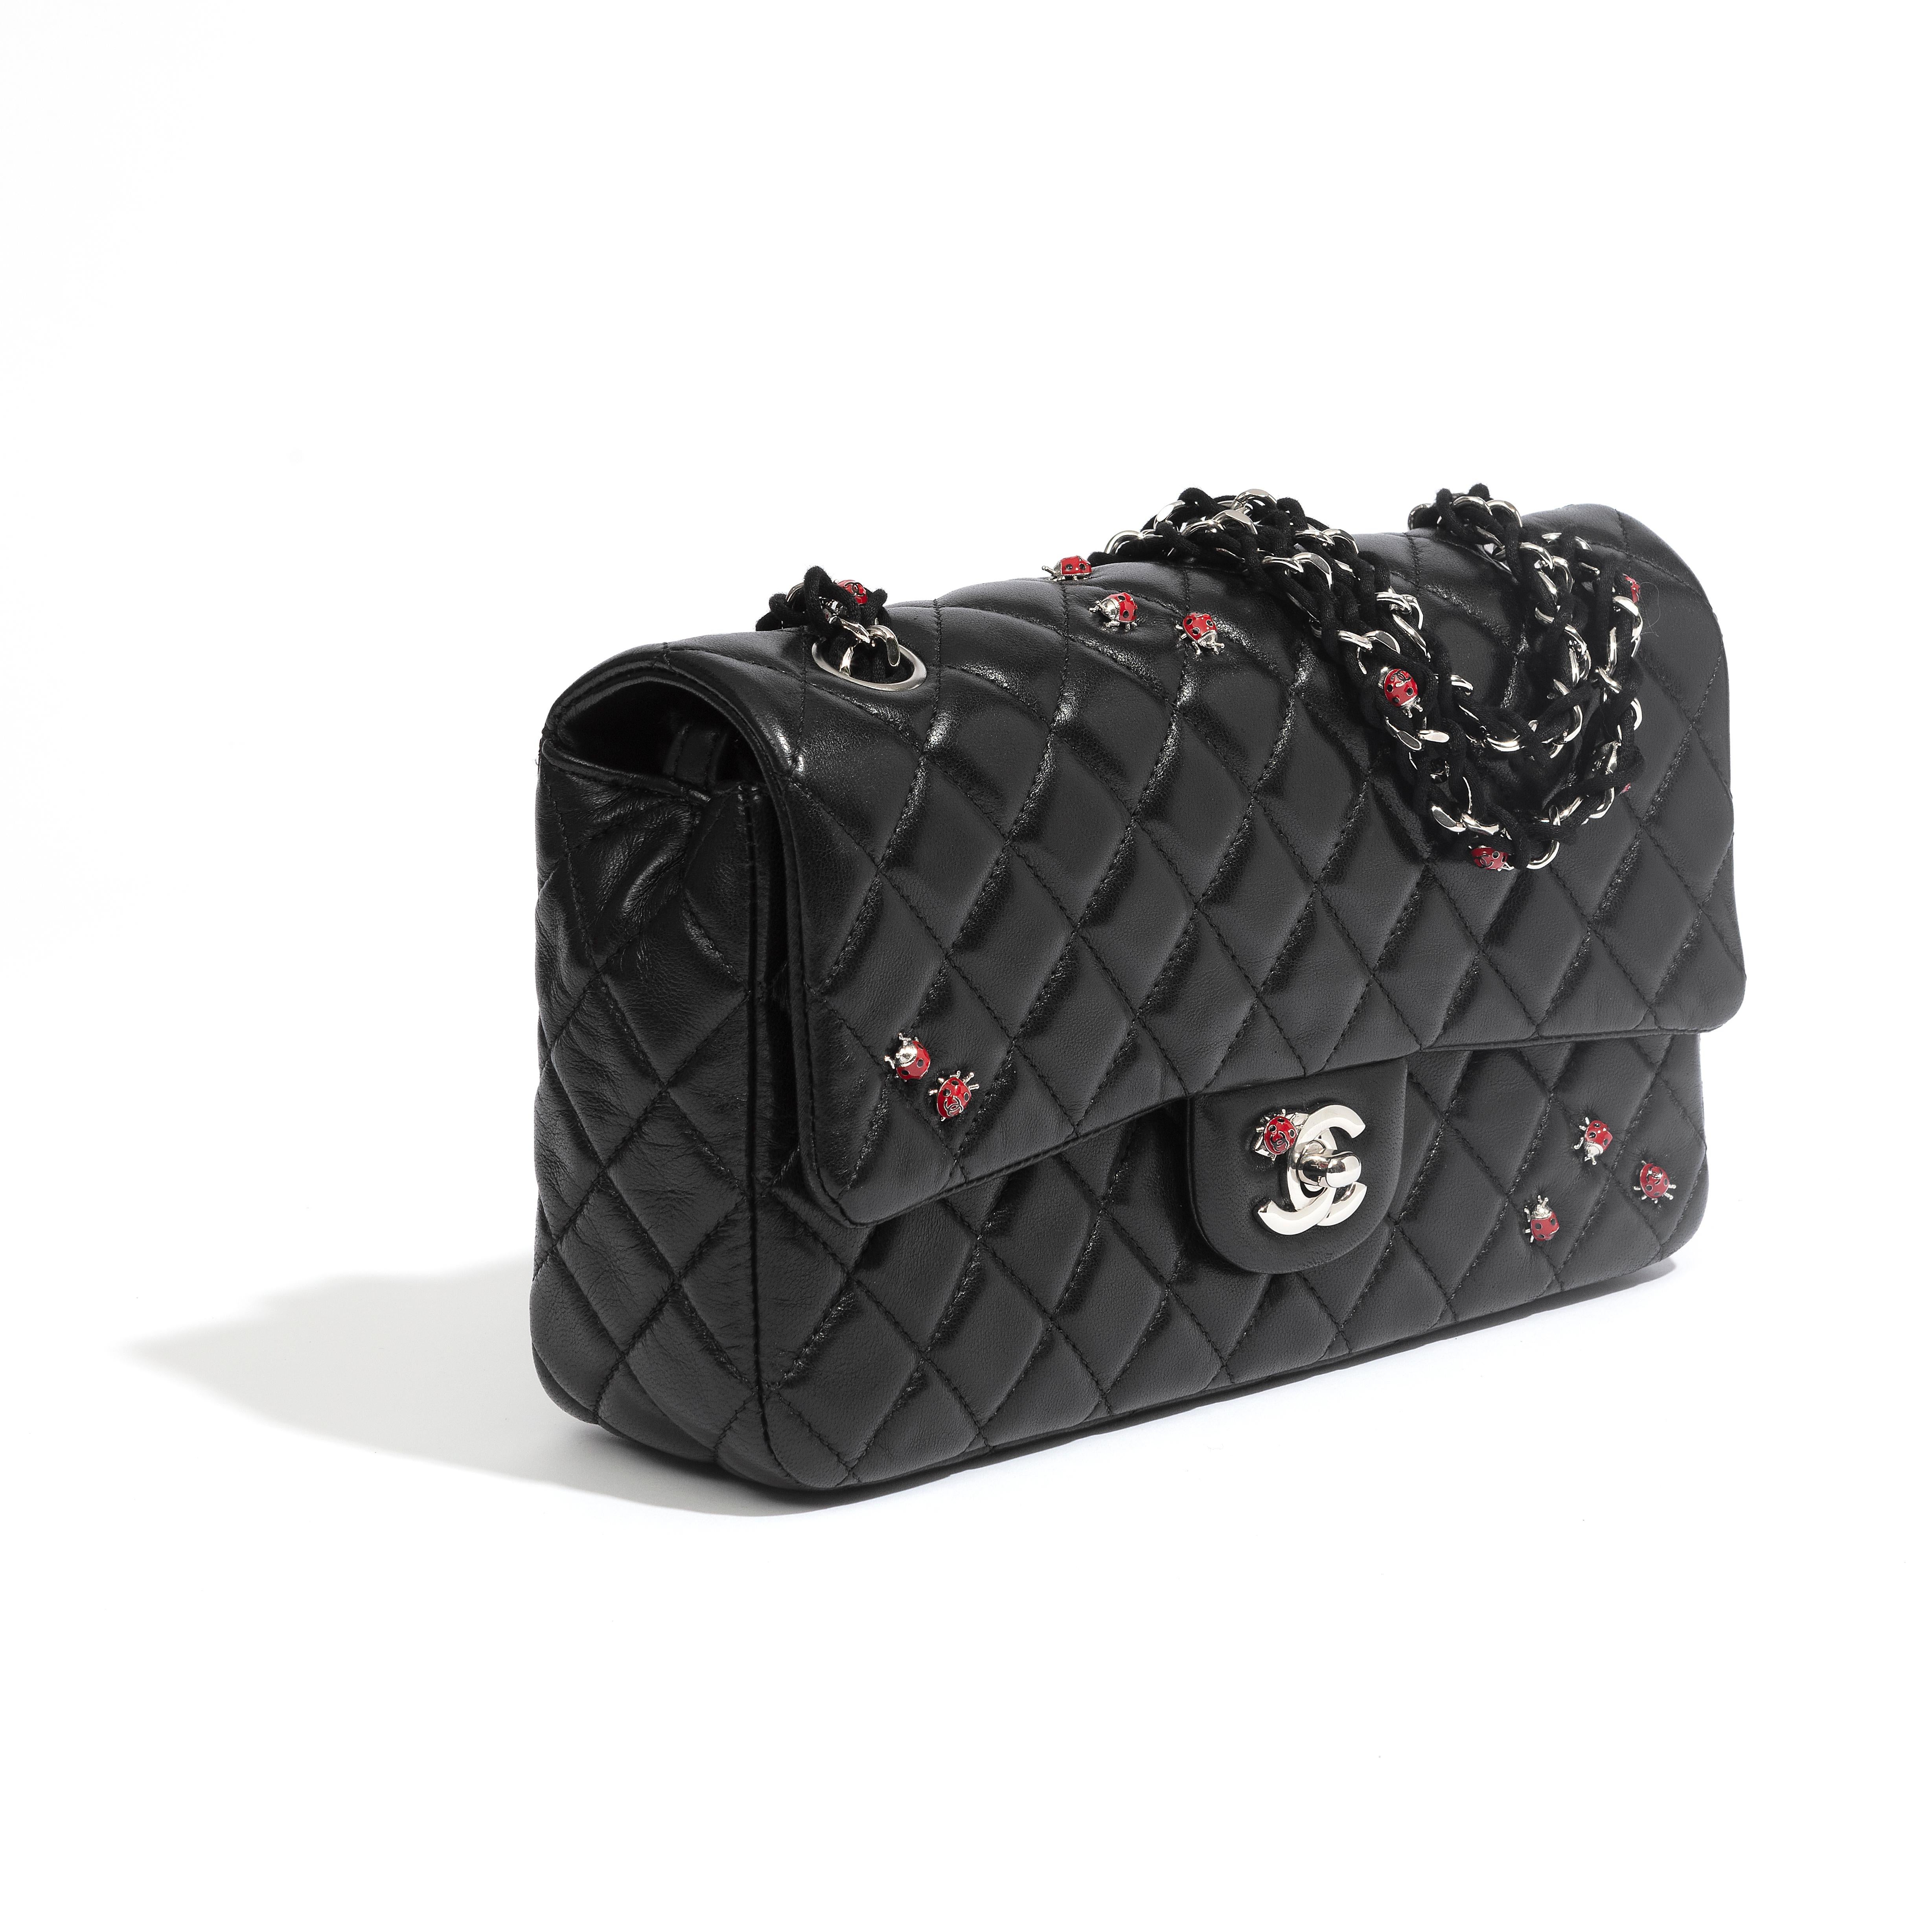 This stunning limited edition ladybug medium flap bag was featured during the 2011 Chanel Spring/Summer collection. 

* Black Quilted Lambskin
* Silver hardware
* The Interior is lined in a tonal textile
* Includes original authenticity card
*